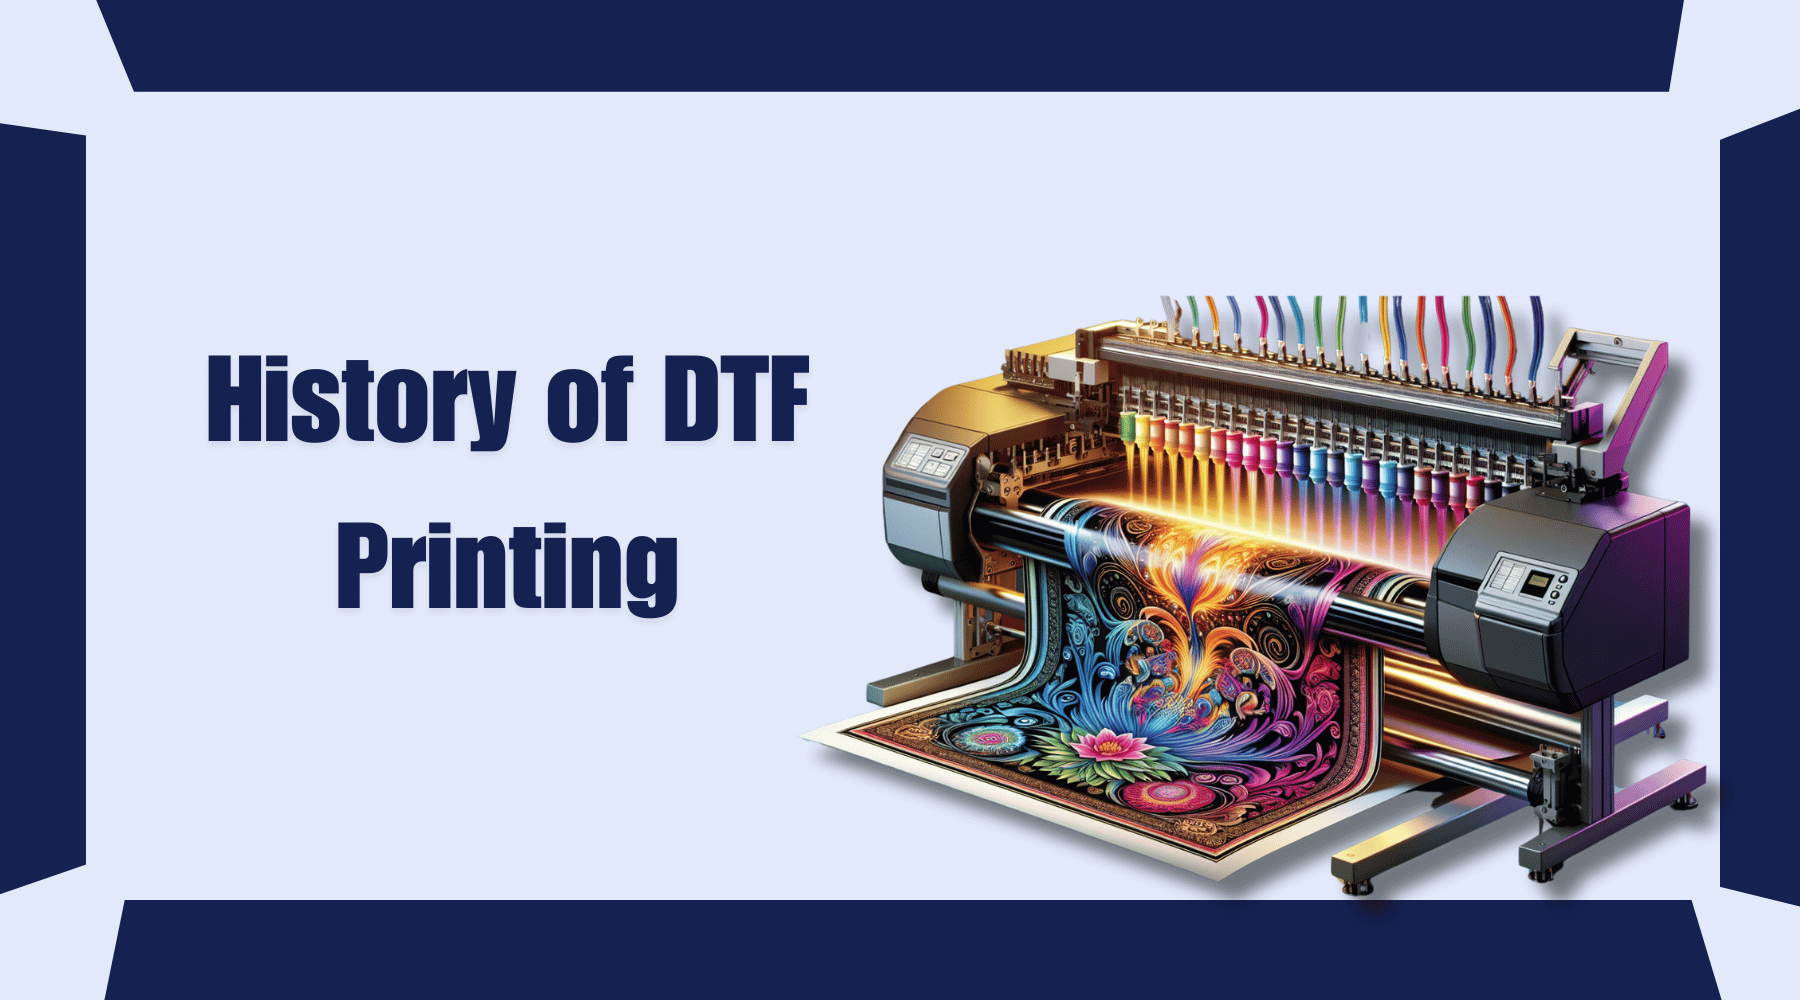 History of DTF Printing